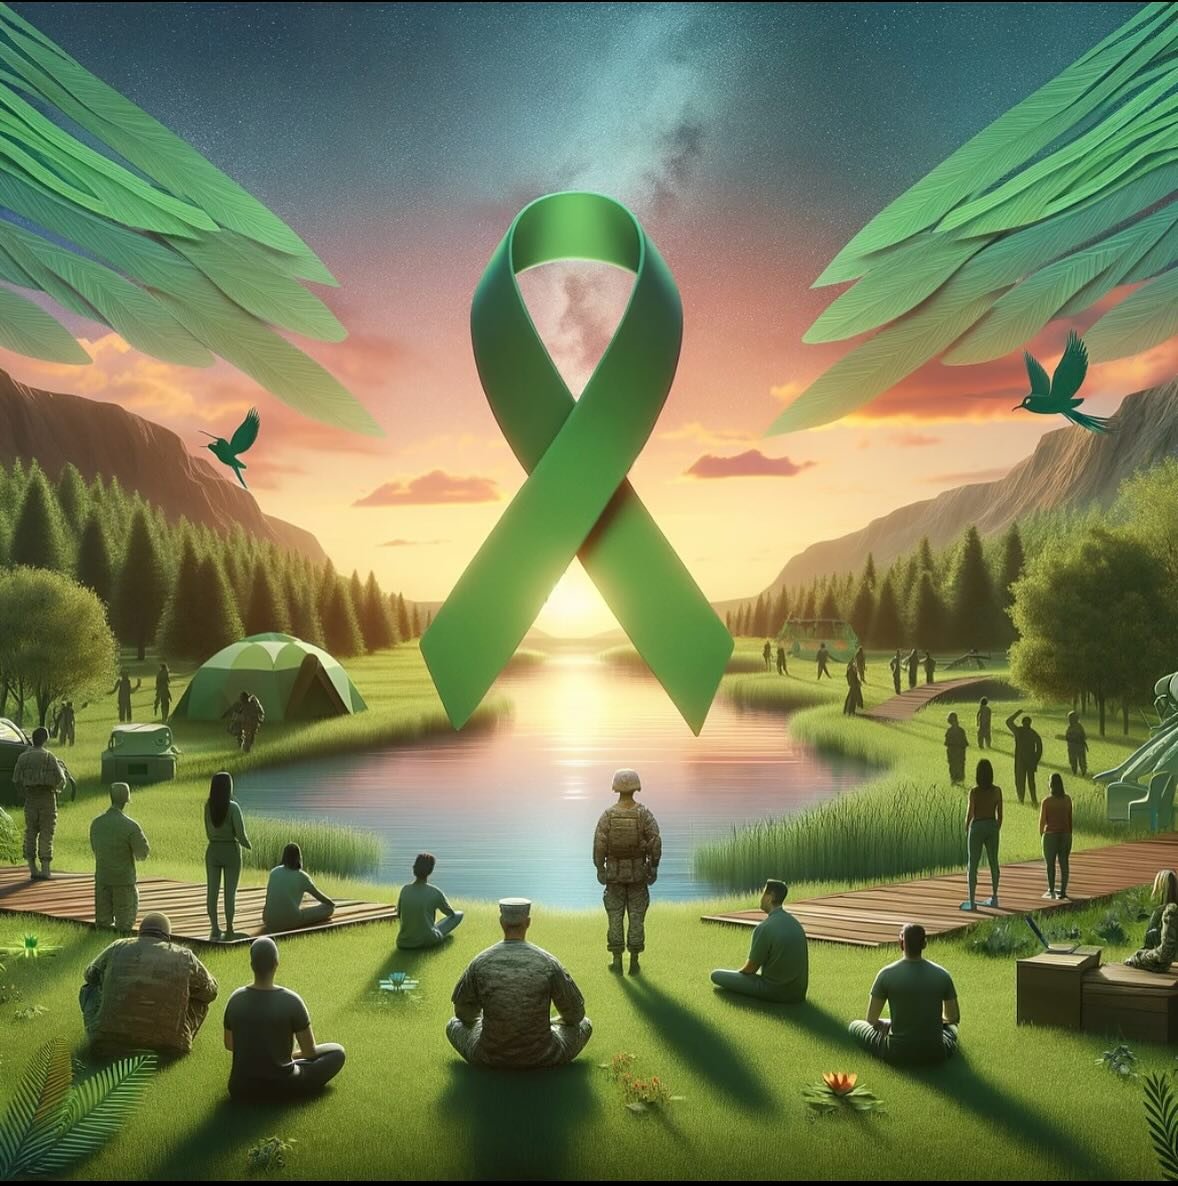 As we recognize May as Mental Health and Suicide Prevention Awareness Month, let&rsquo;s stand in solidarity with our military community. 💚 The challenges they face, both on and off the battlefield, can deeply impact mental well-being. Let&rsquo;s p